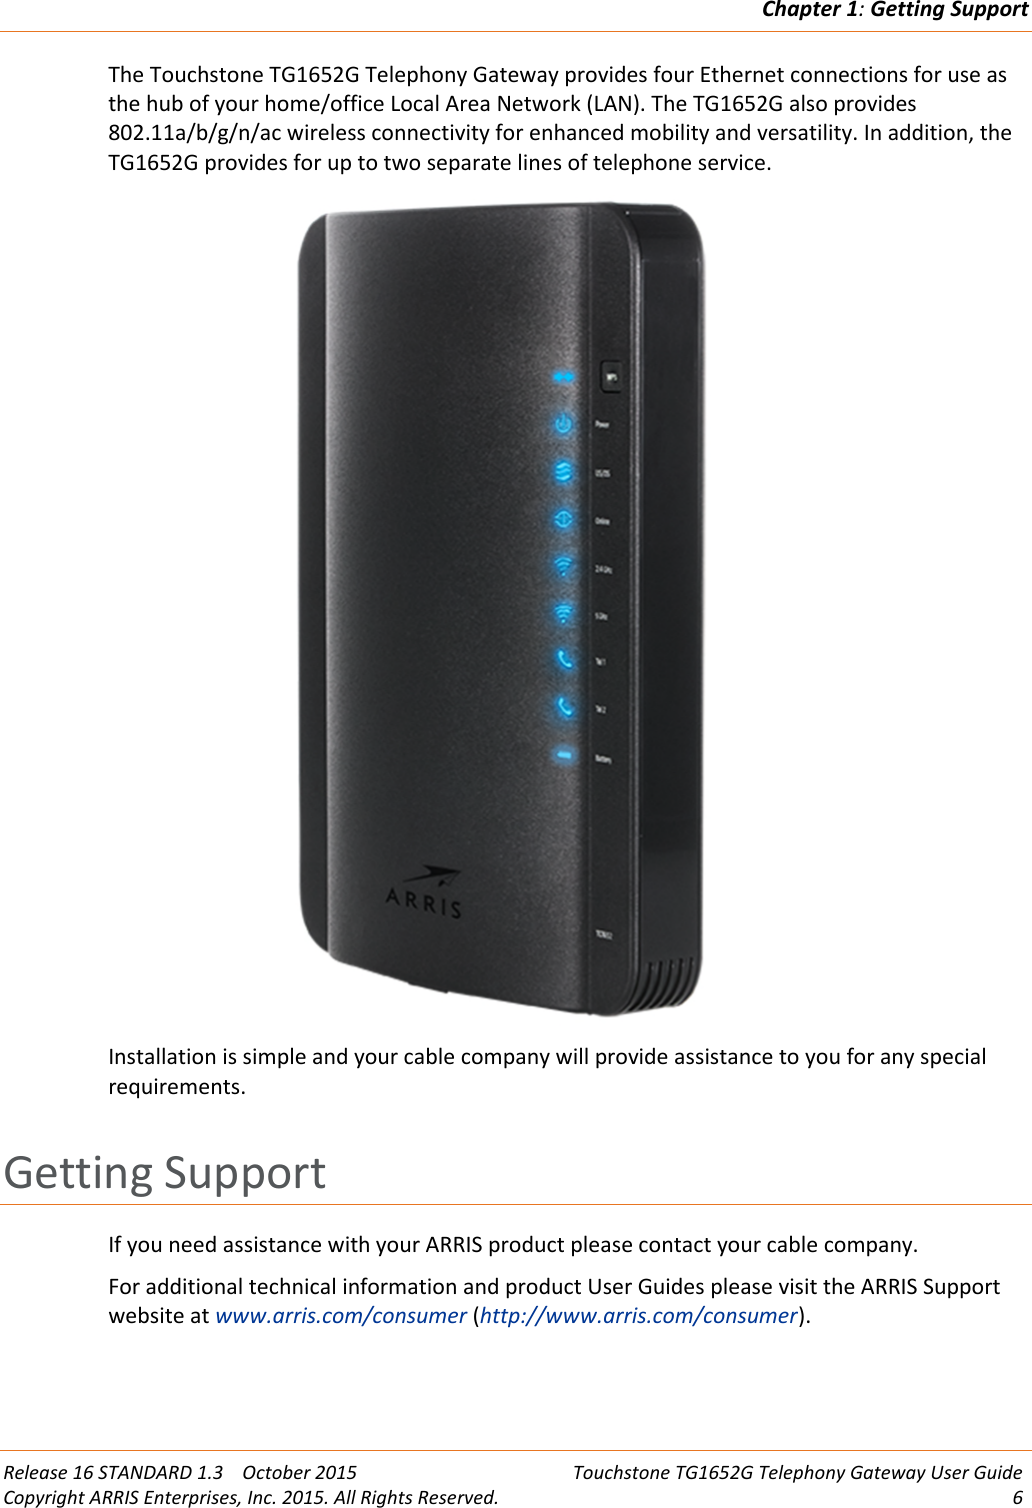 Chapter 1:Getting SupportRelease 16 STANDARD 1.3 October 2015 Touchstone TG1652G Telephony Gateway User GuideCopyright ARRIS Enterprises, Inc. 2015. All Rights Reserved. 6The Touchstone TG1652G Telephony Gateway provides four Ethernet connections for use asthe hub of your home/office Local Area Network (LAN). The TG1652G also provides802.11a/b/g/n/ac wireless connectivity for enhanced mobility and versatility. In addition, theTG1652G provides for up to two separate lines of telephone service.Installation is simple and your cable company will provide assistance to you for any specialrequirements.Getting SupportIf you need assistance with your ARRIS product please contact your cable company.For additional technical information and product User Guides please visit the ARRIS Supportwebsite at www.arris.com/consumer (http://www.arris.com/consumer).